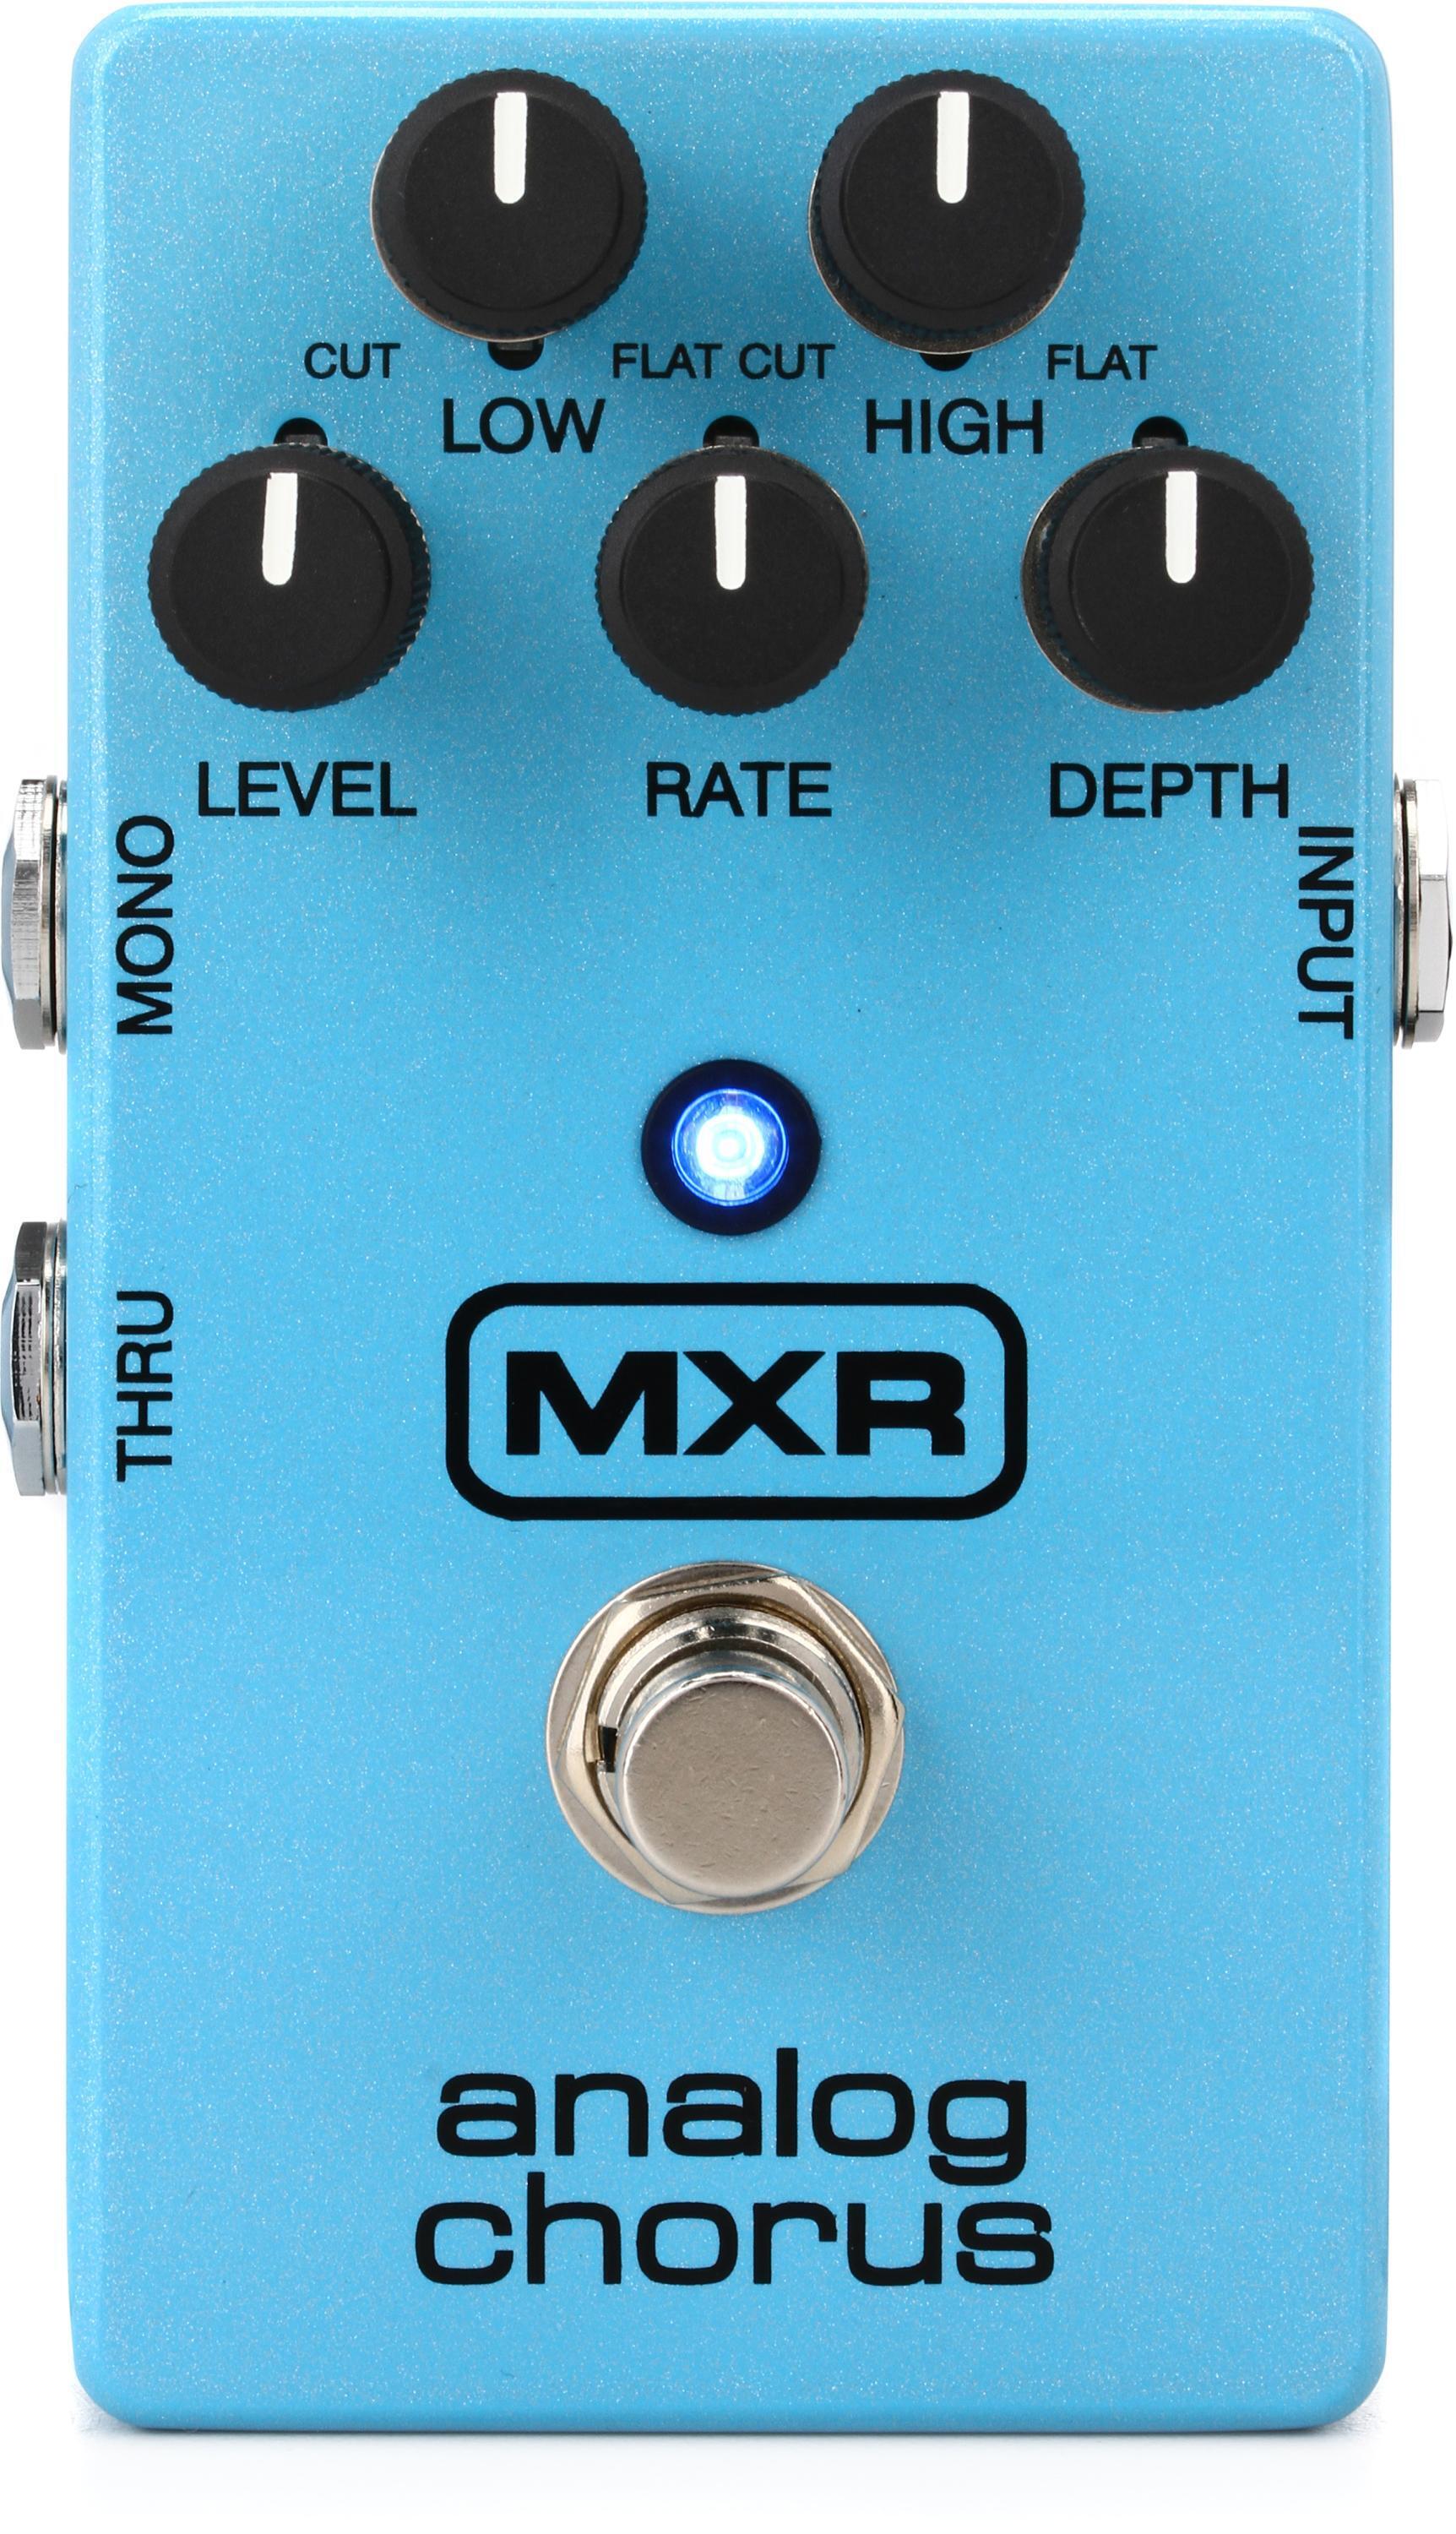 MXR M234 Analog Chorus Pedal with 3 Patch Cables | Sweetwater